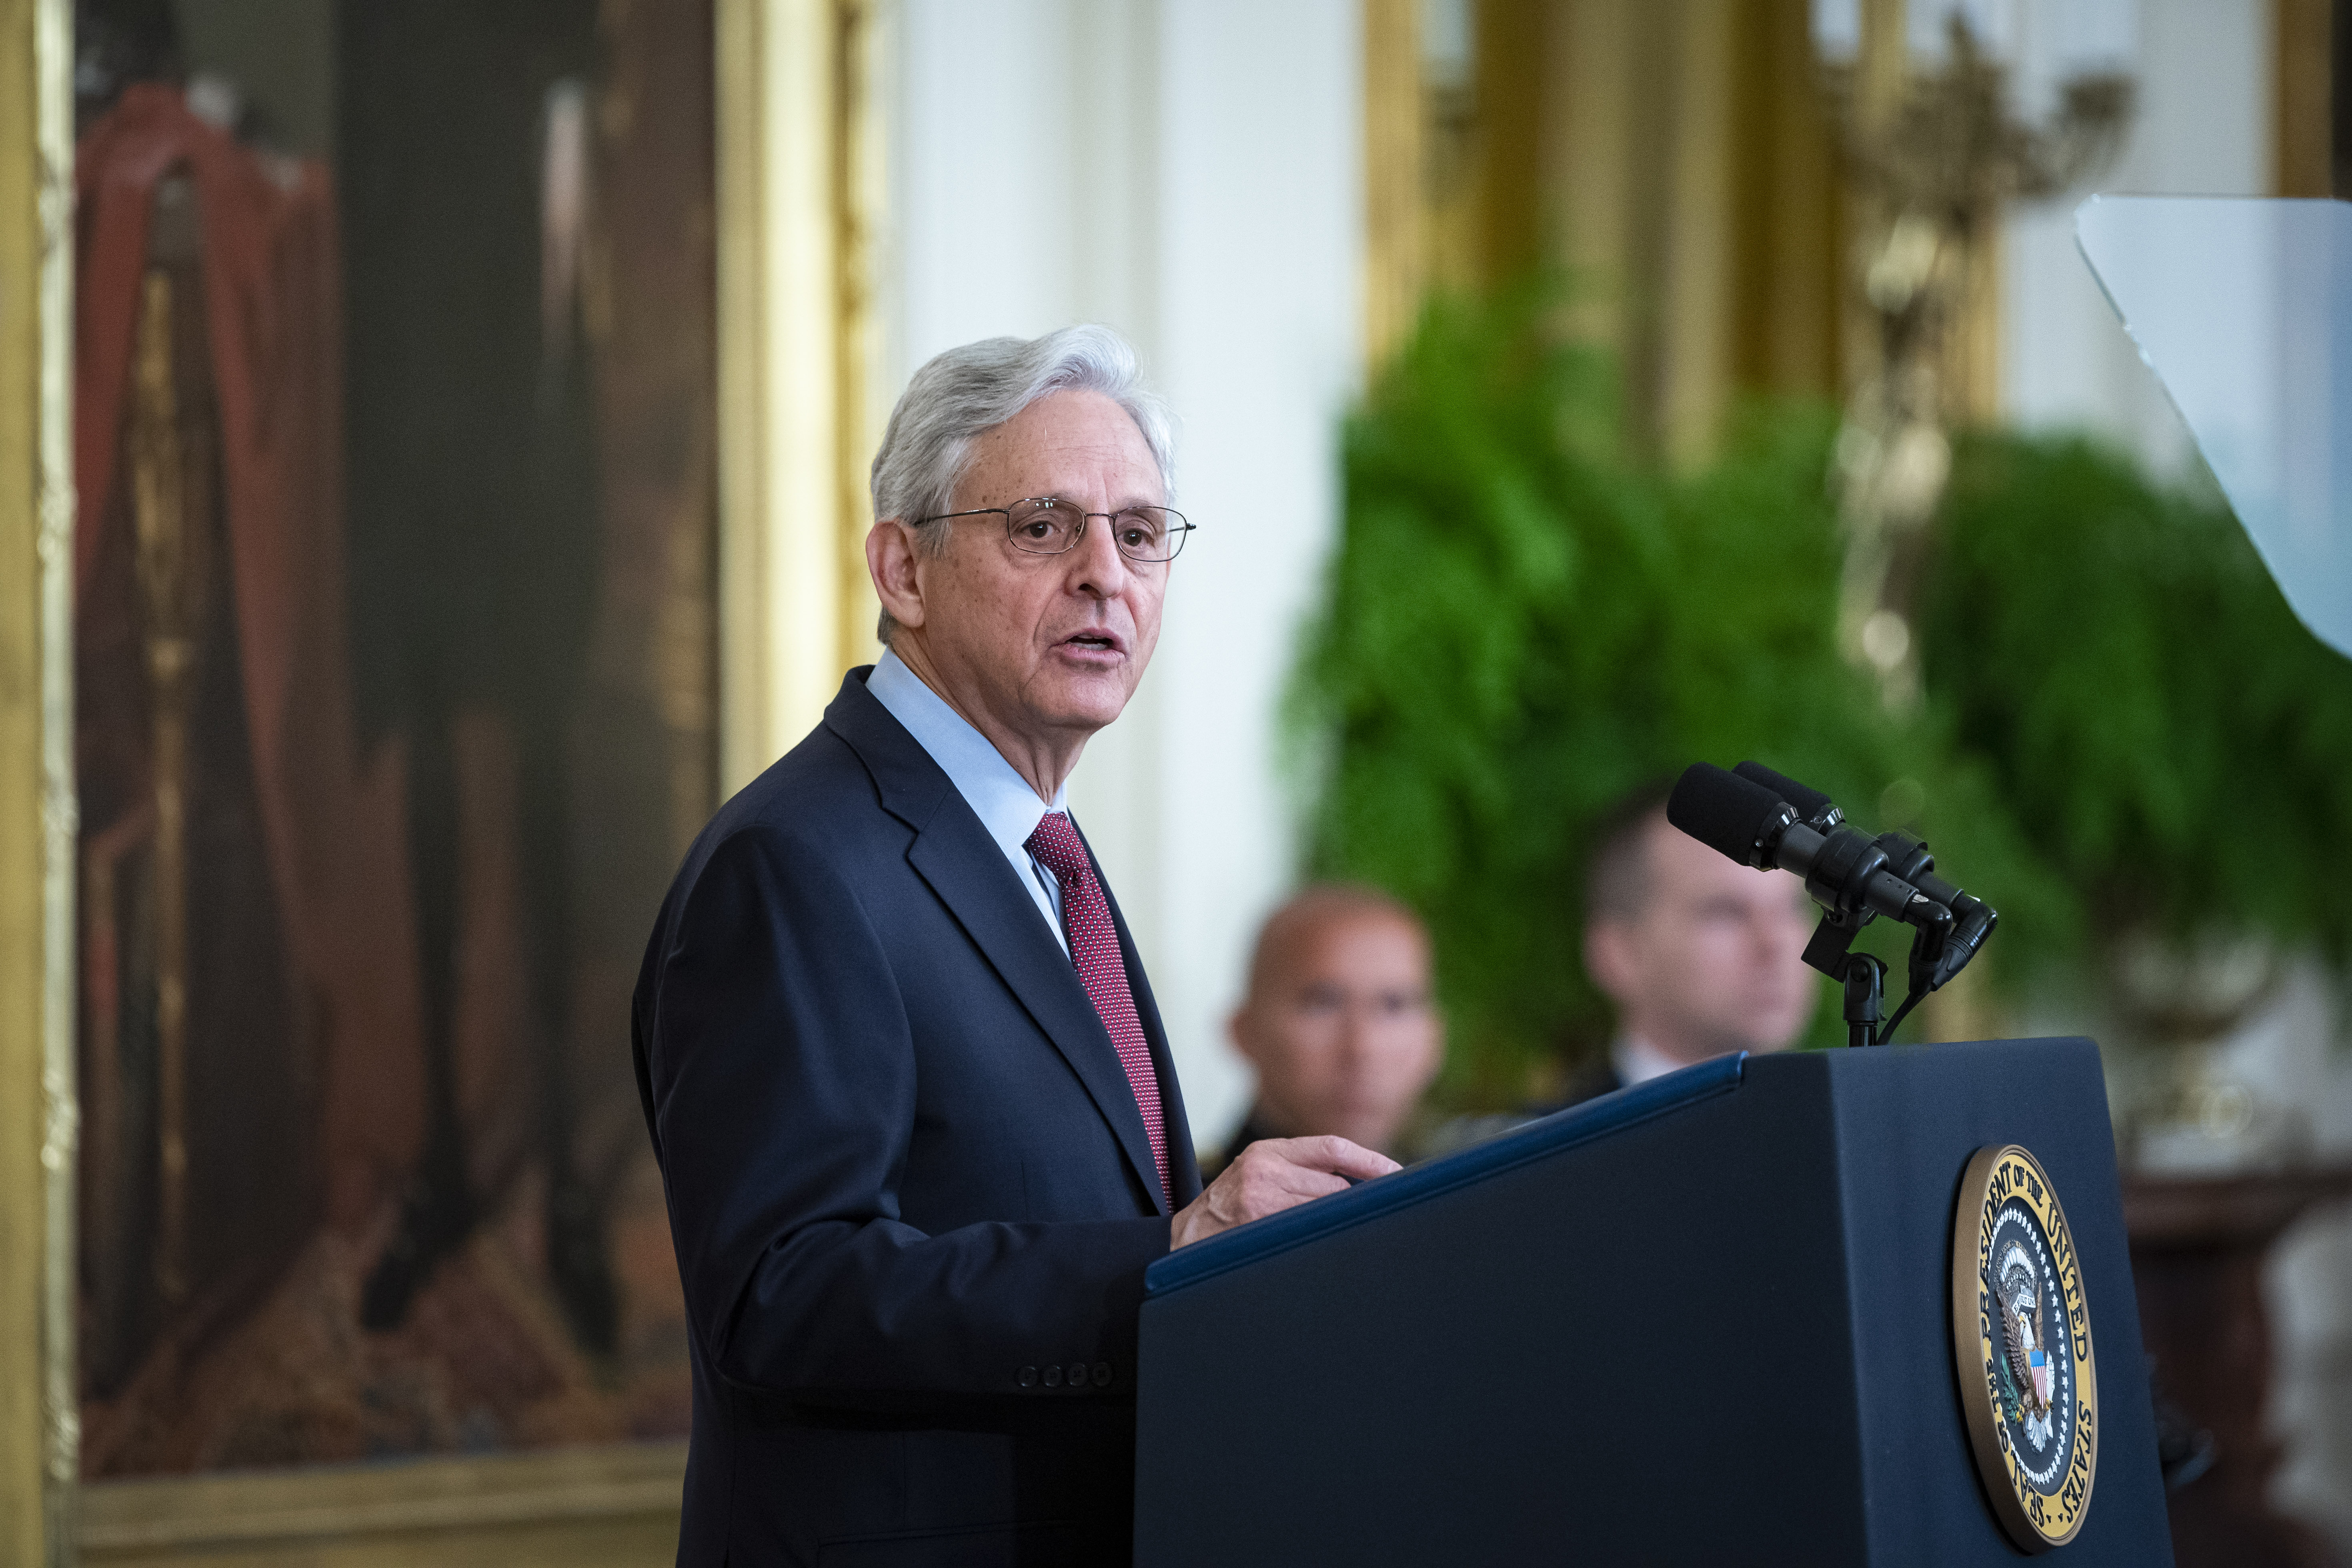 Merrick Garland, US Attorney General, speaks during an event at the White House in Washington, DC, on Monday.